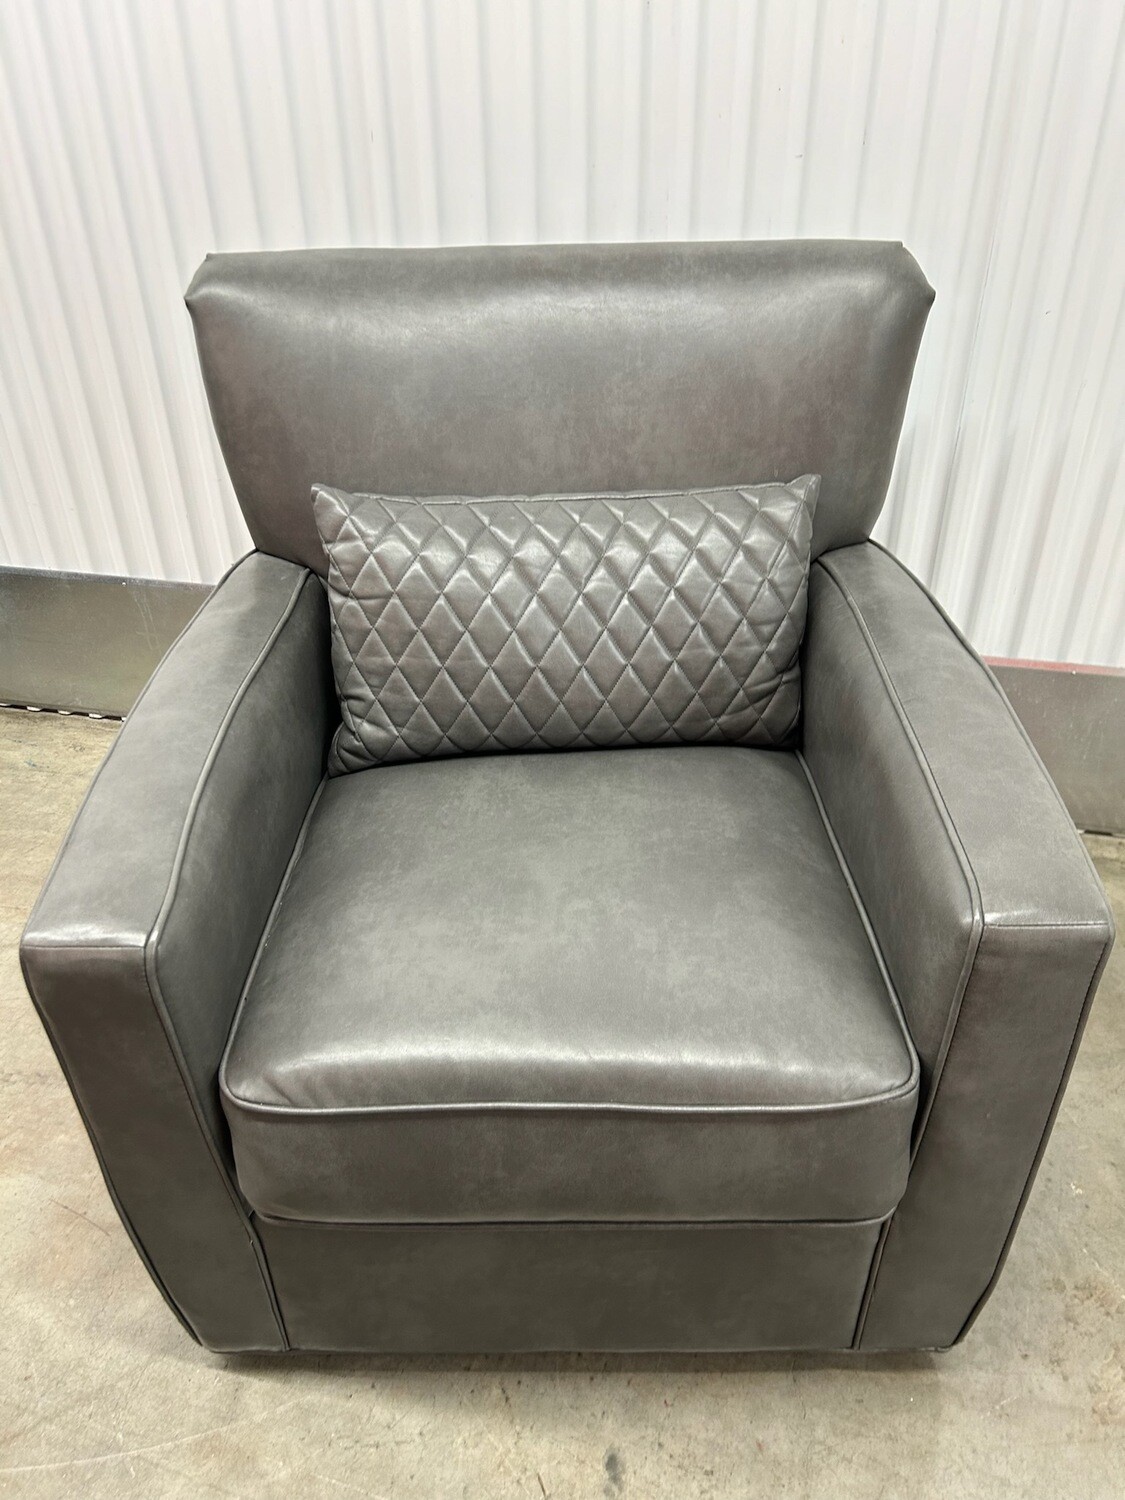 Gray Swivel Chair, faux leather #2213 ** 1 mo. to sell, full price